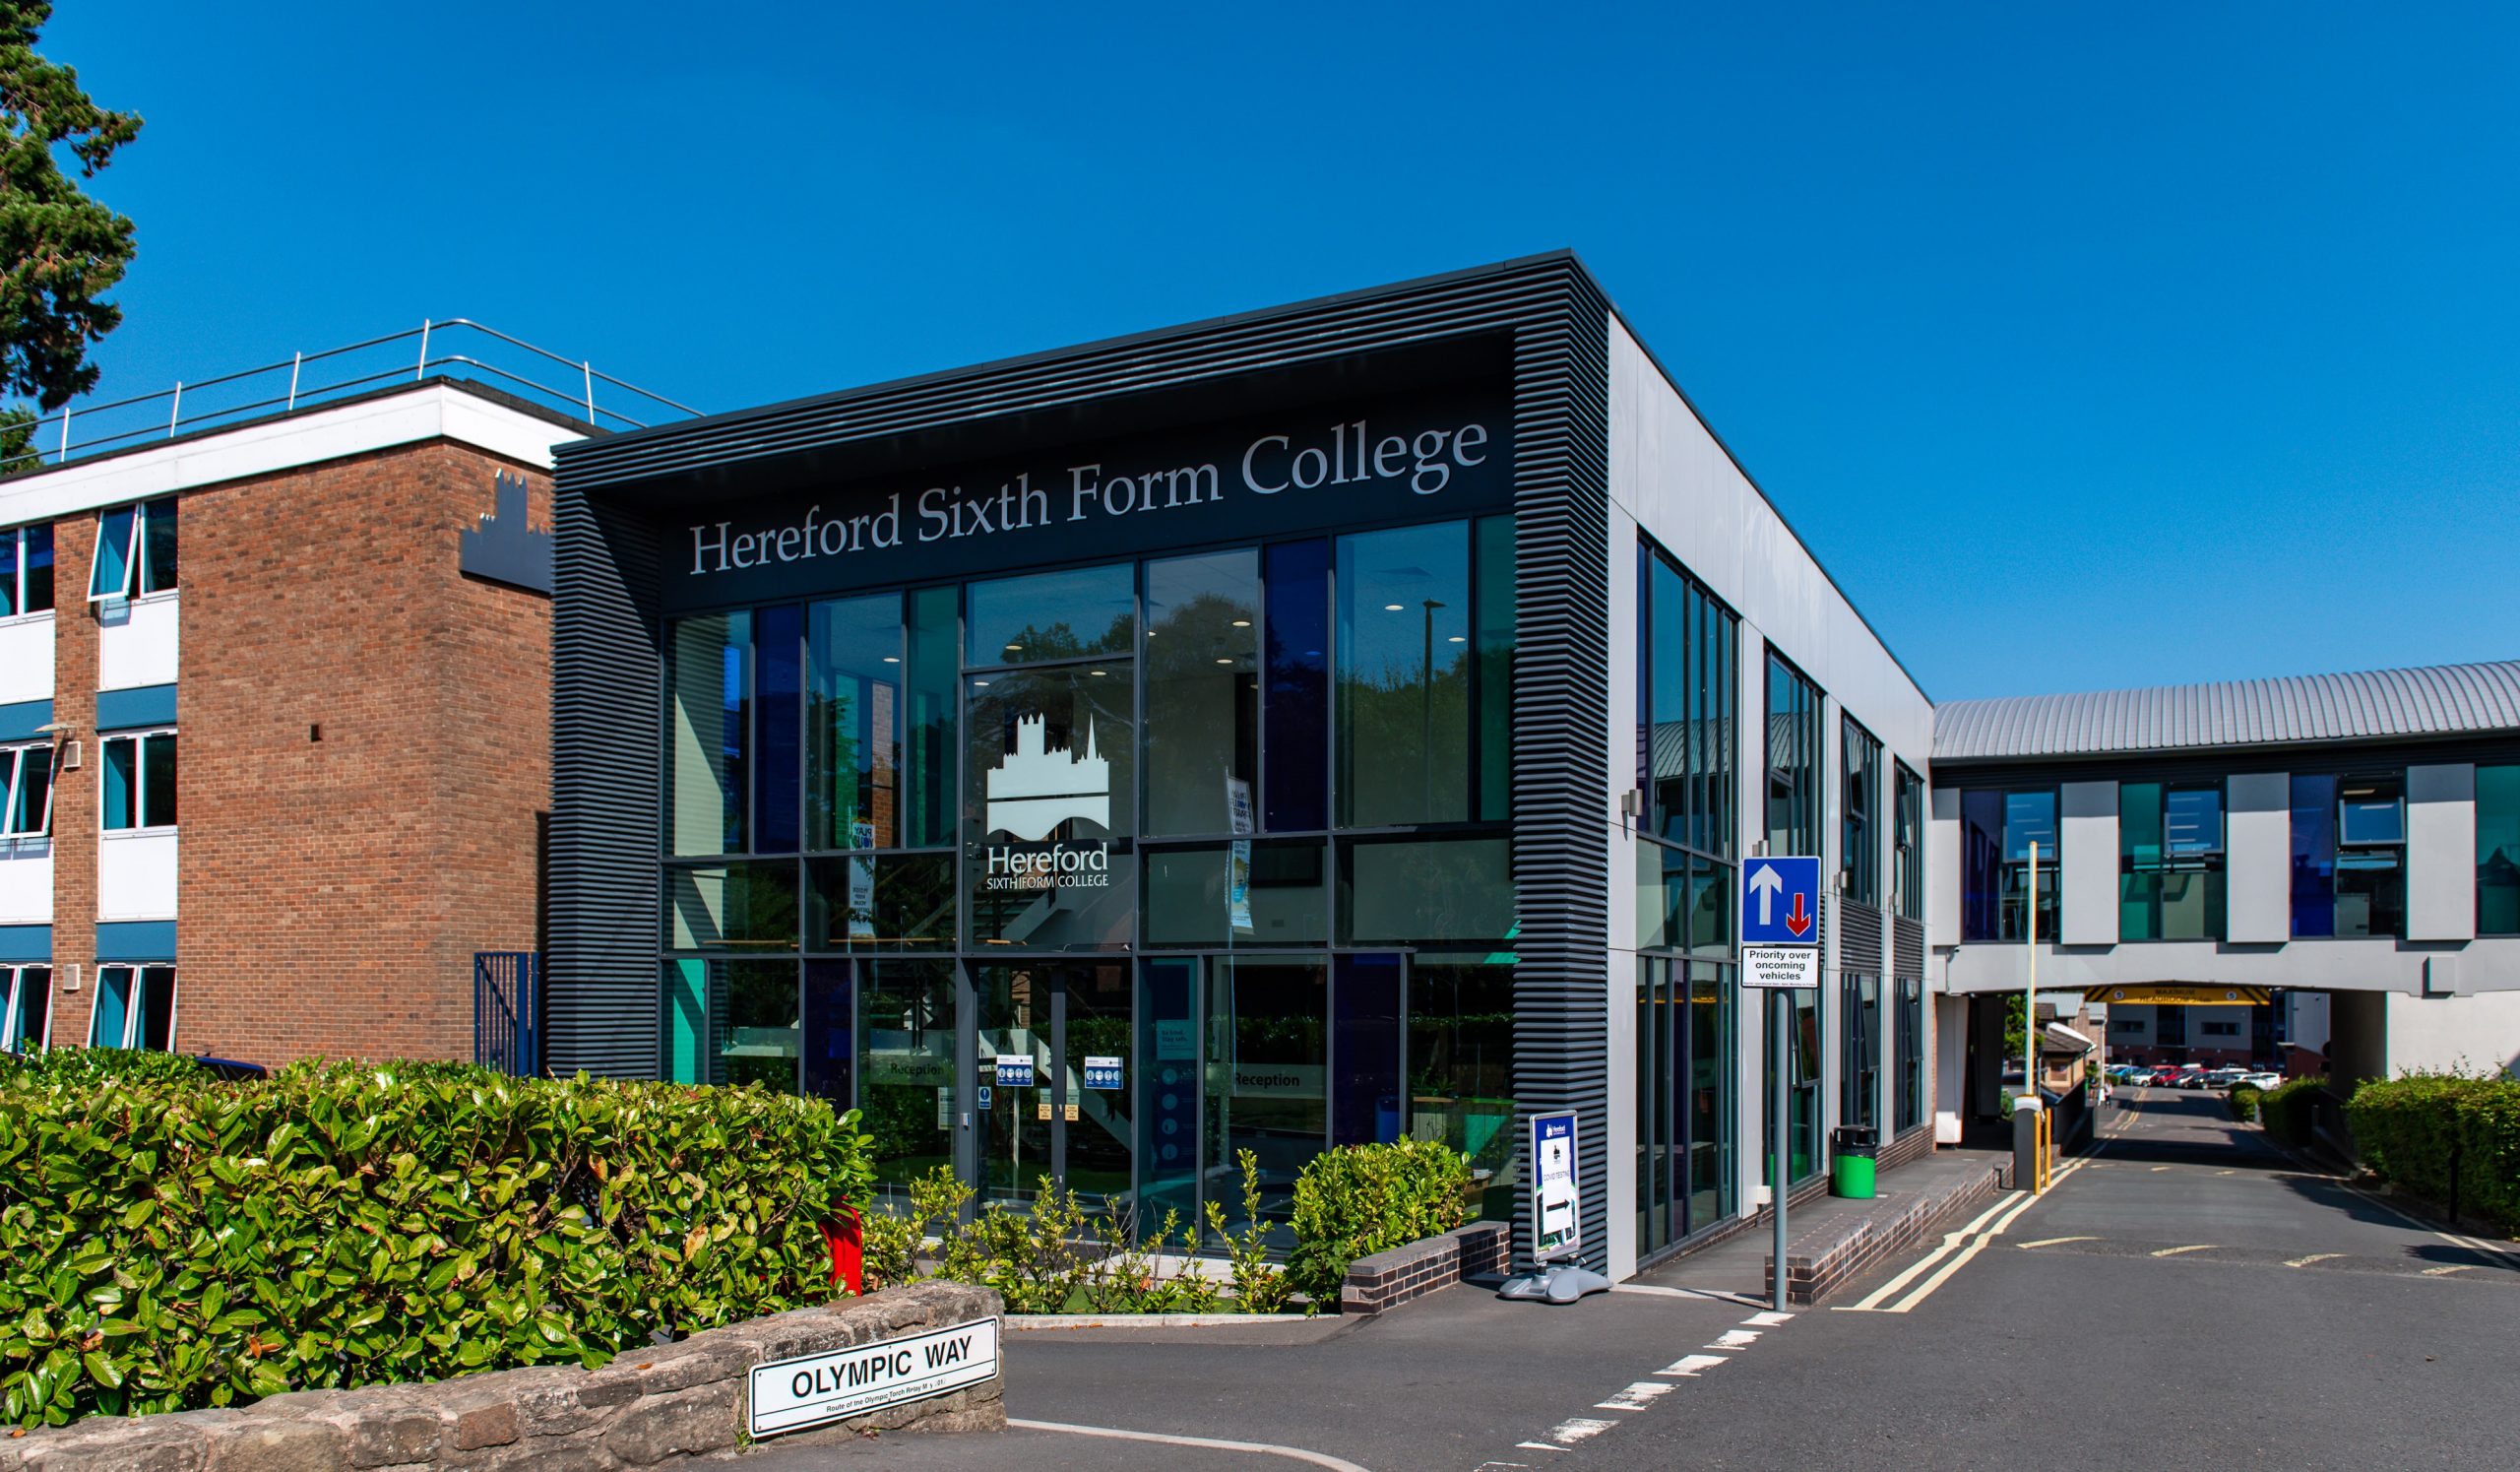 EDUCATION | 20/20 in 2021 for Medicine & Oxbridge Applicants at Hereford Sixth Form College